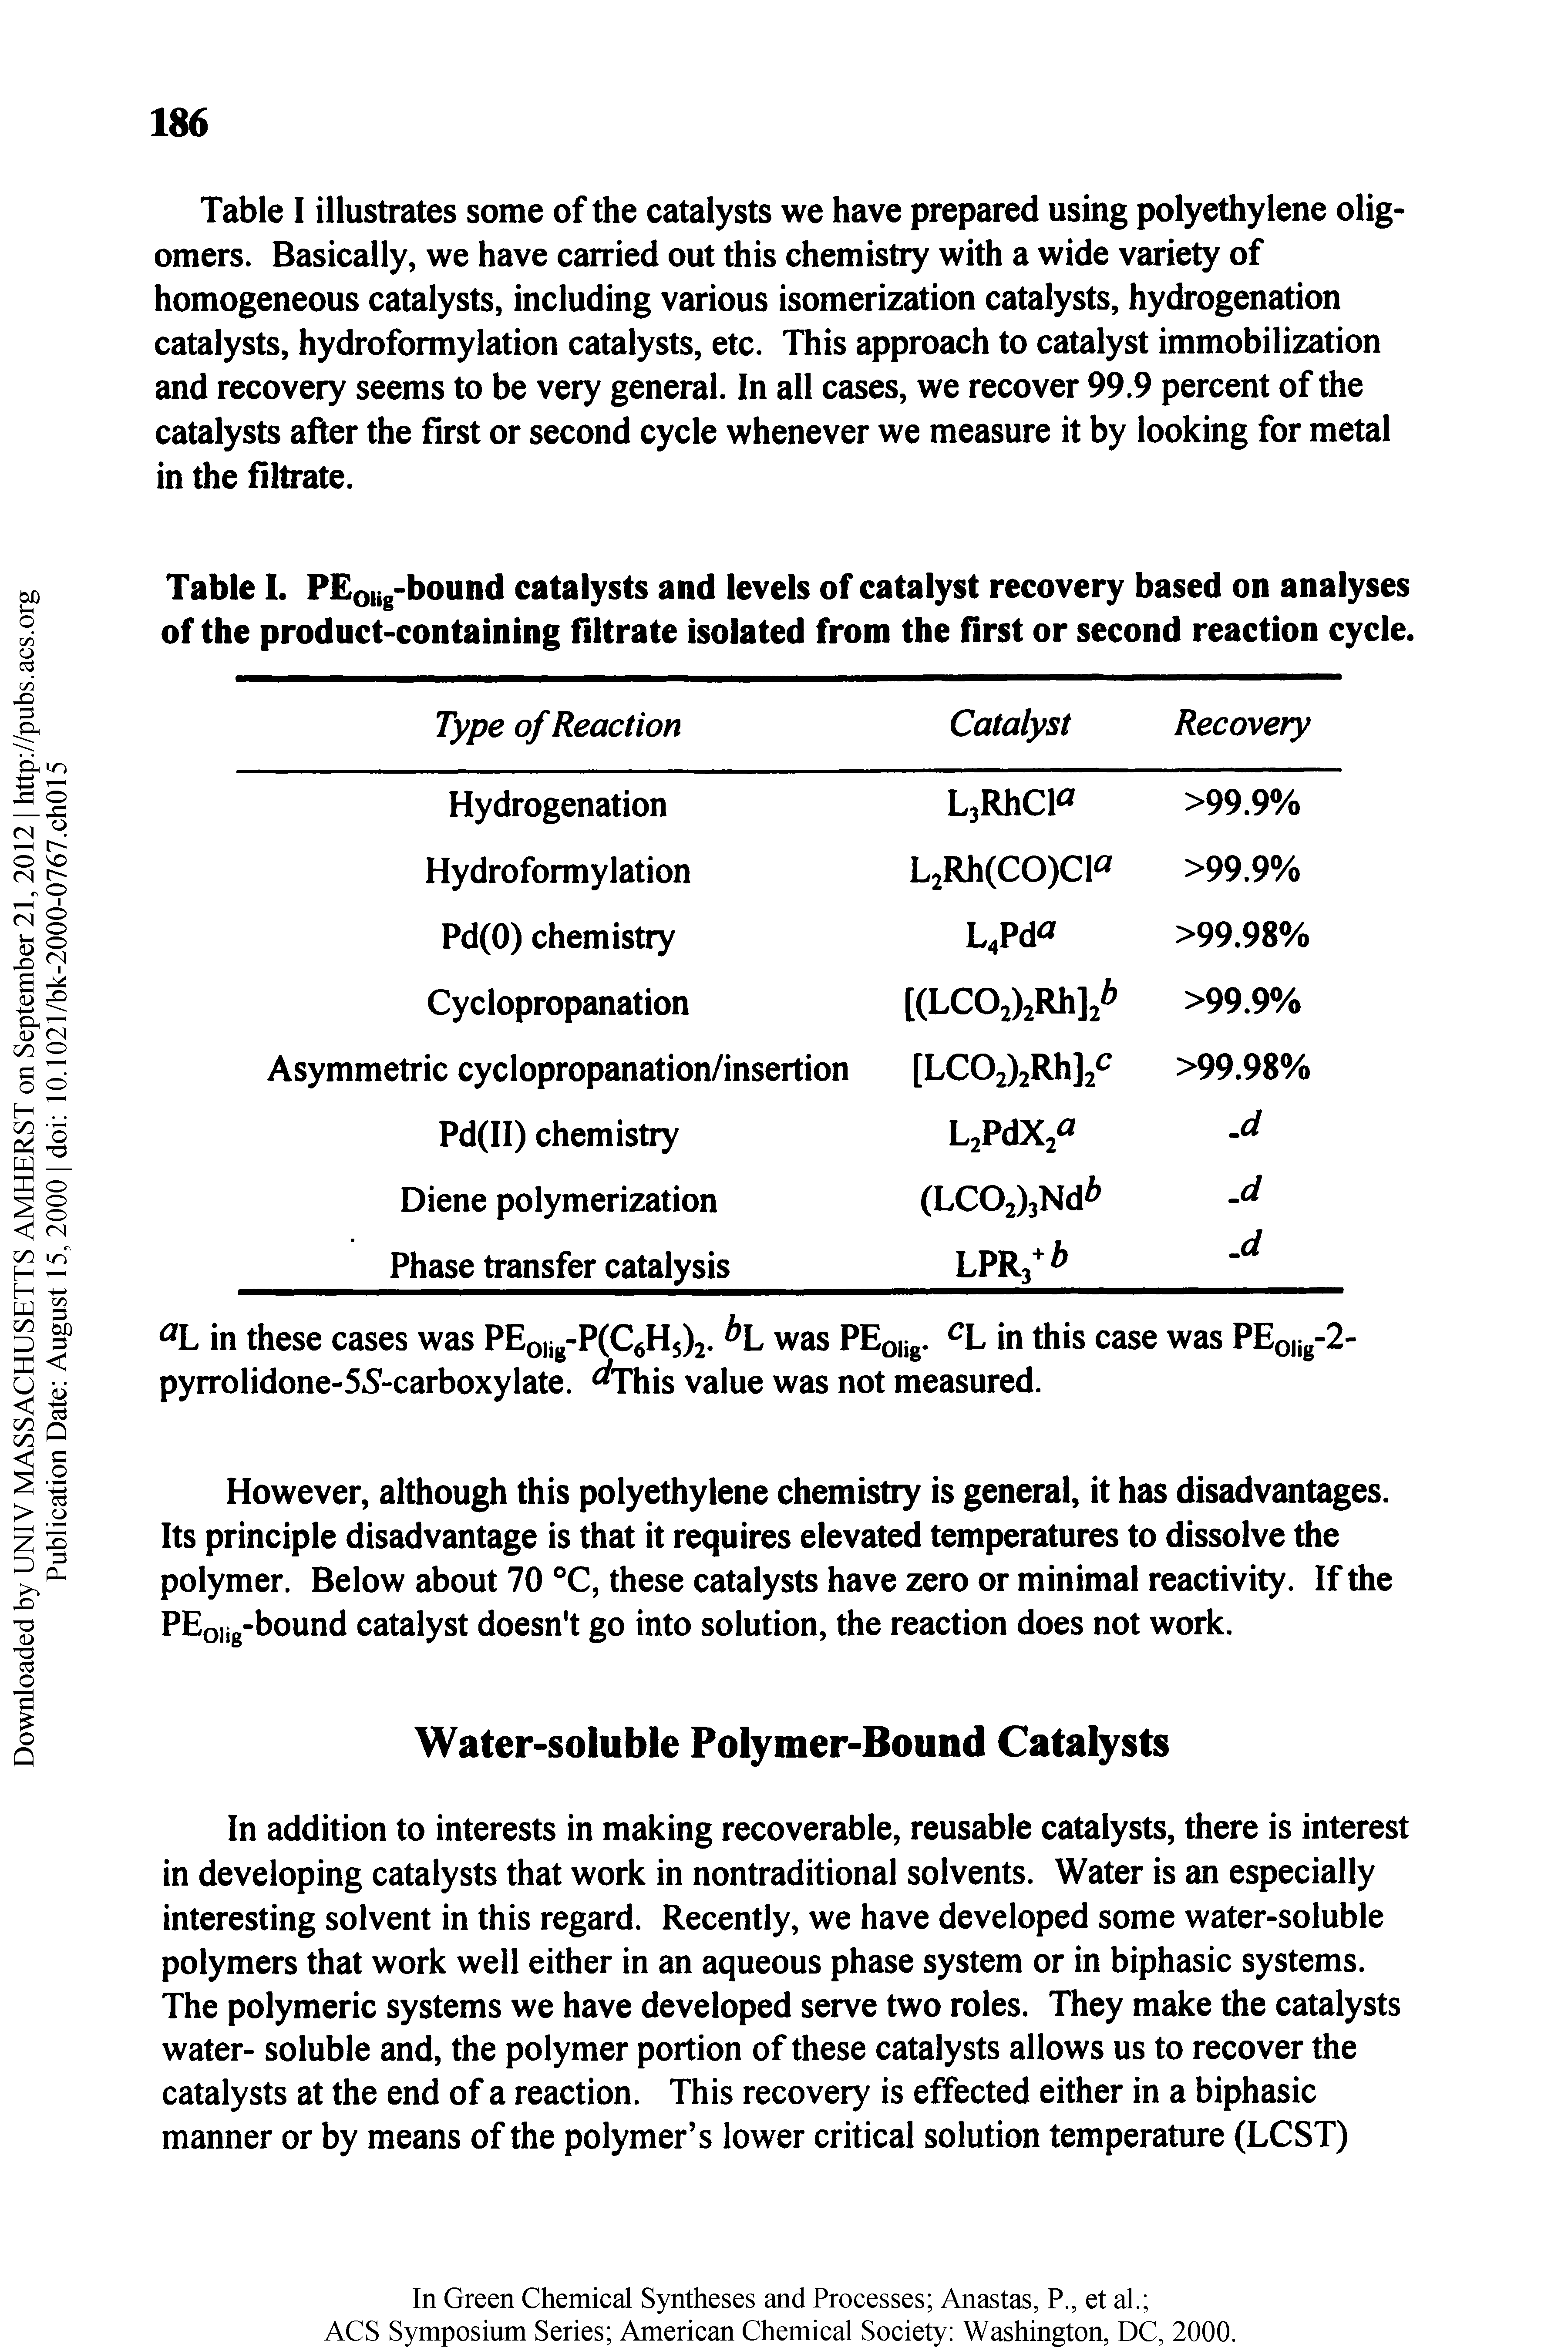 Table I illustrates some of the catalysts we have prepared using polyethylene oligomers. Basically, we have carried out this chemistry with a wide variety of homogeneous catalysts, including various isomerization catalysts, hydrogenation catalysts, hydroformylation catalysts, etc. This approach to catalyst immobilization and recovery seems to be very general. In all cases, we recover 99.9 percent of the catalysts after the first or second cycle whenever we measure it by looking for metal in the filtrate.